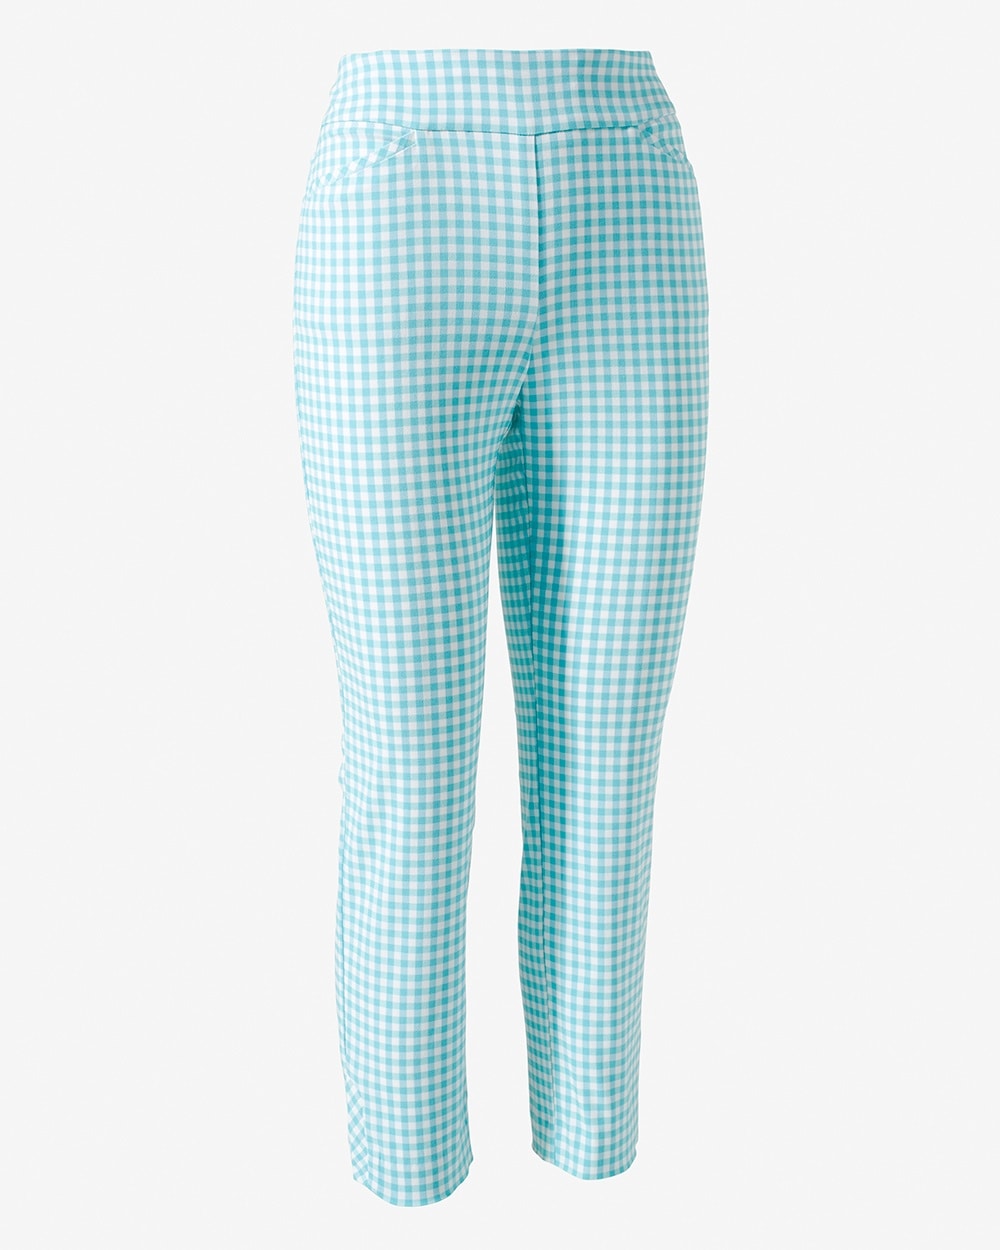 Perfect Stretch Gingham Dream Slim Ankle Pants